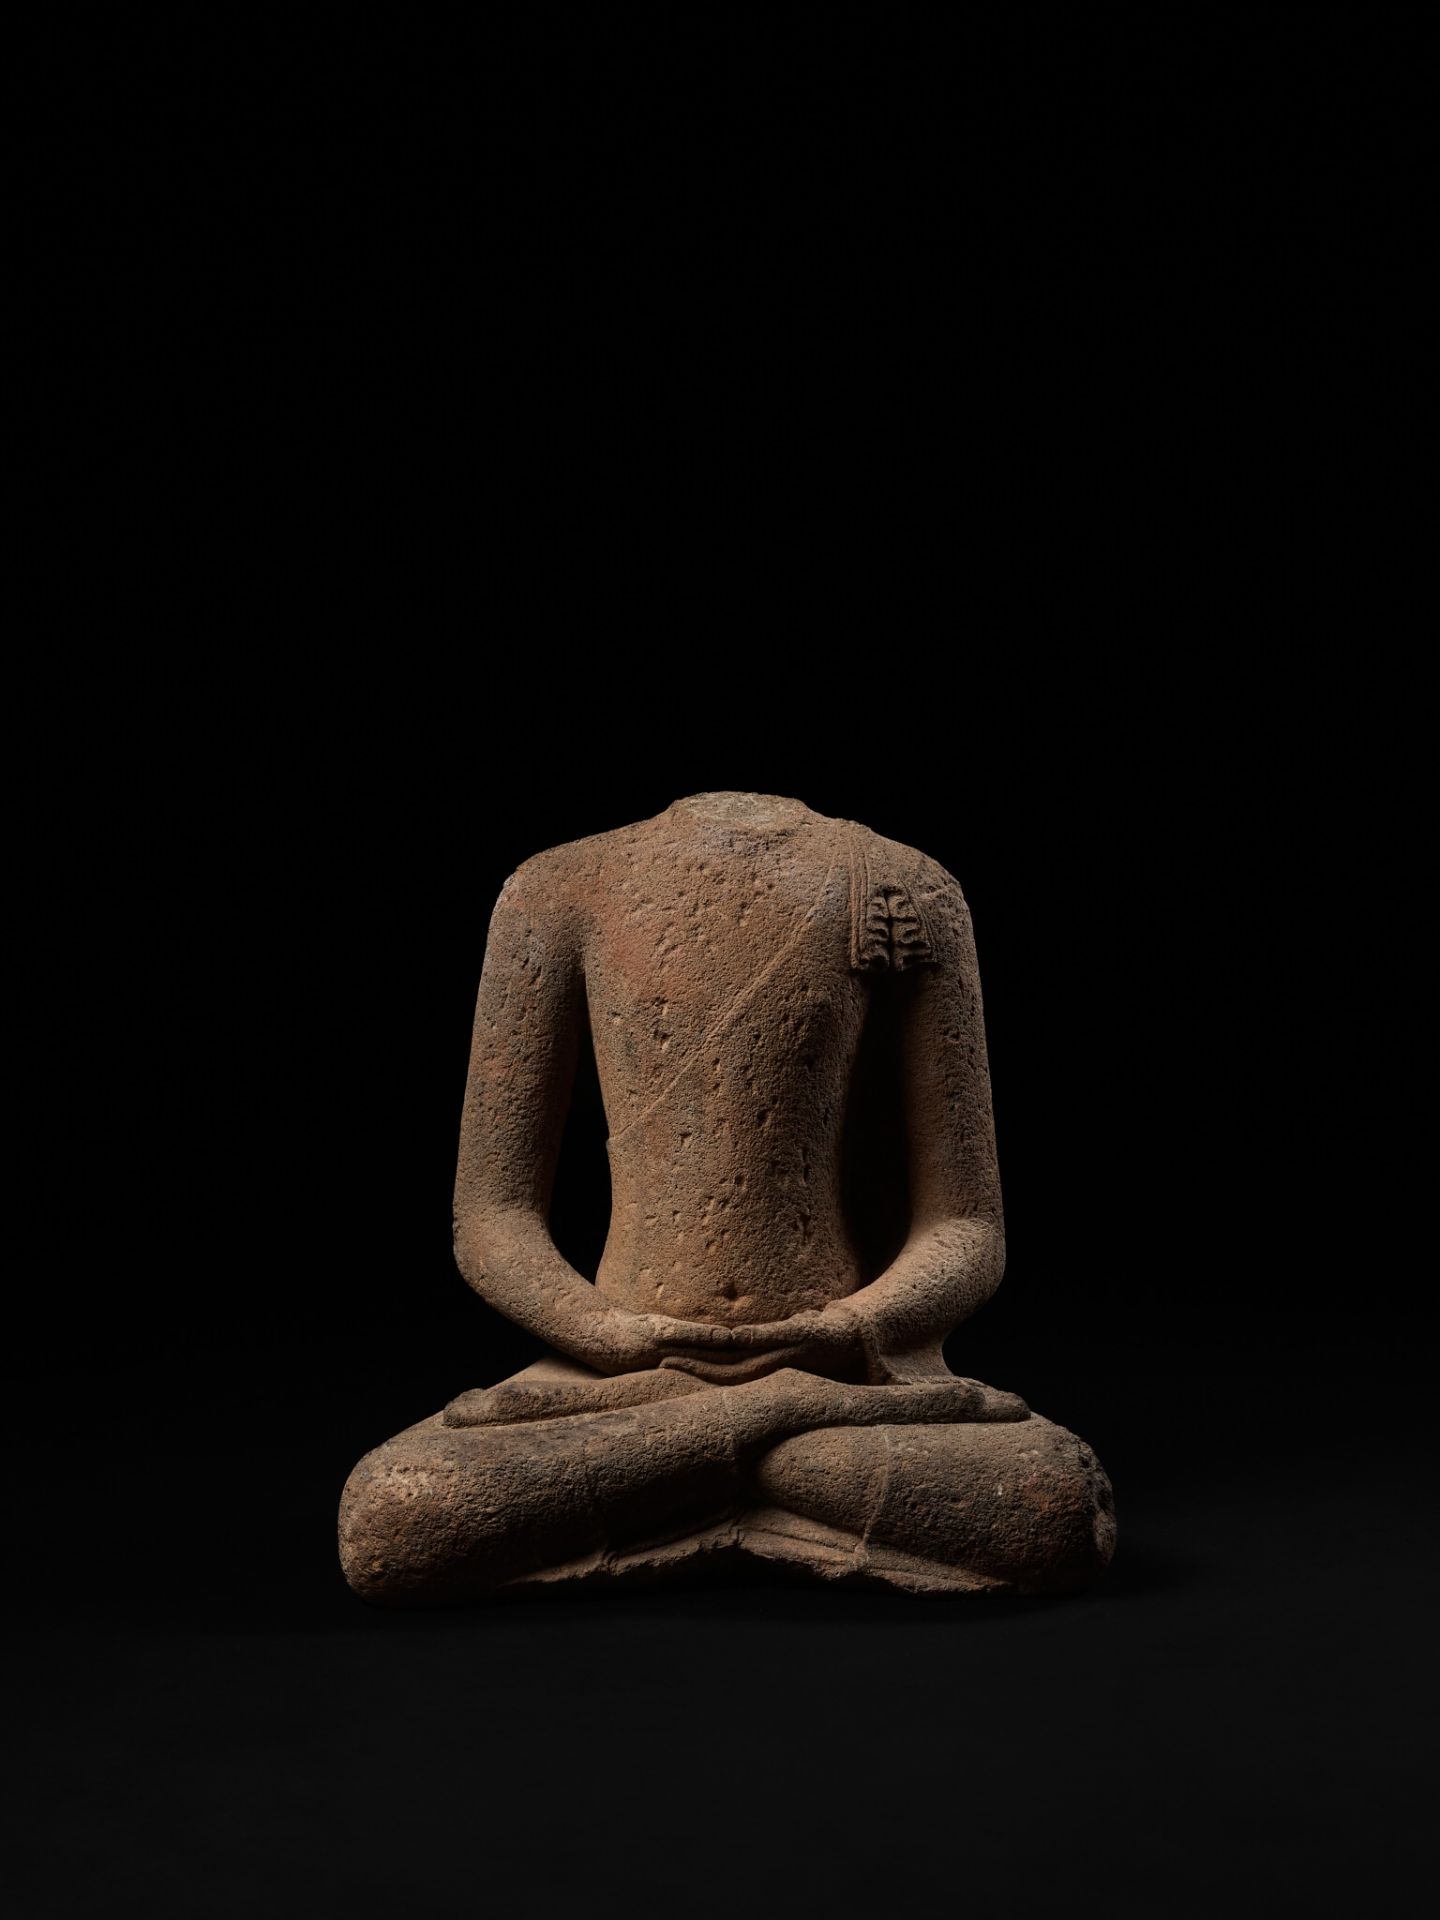 A RARE AND LARGE ANDESITE TORSO OF BUDDHA AMITABHA, CENTRAL JAVANESE PERIOD, SHAILENDRA DYNASTY - Image 7 of 16